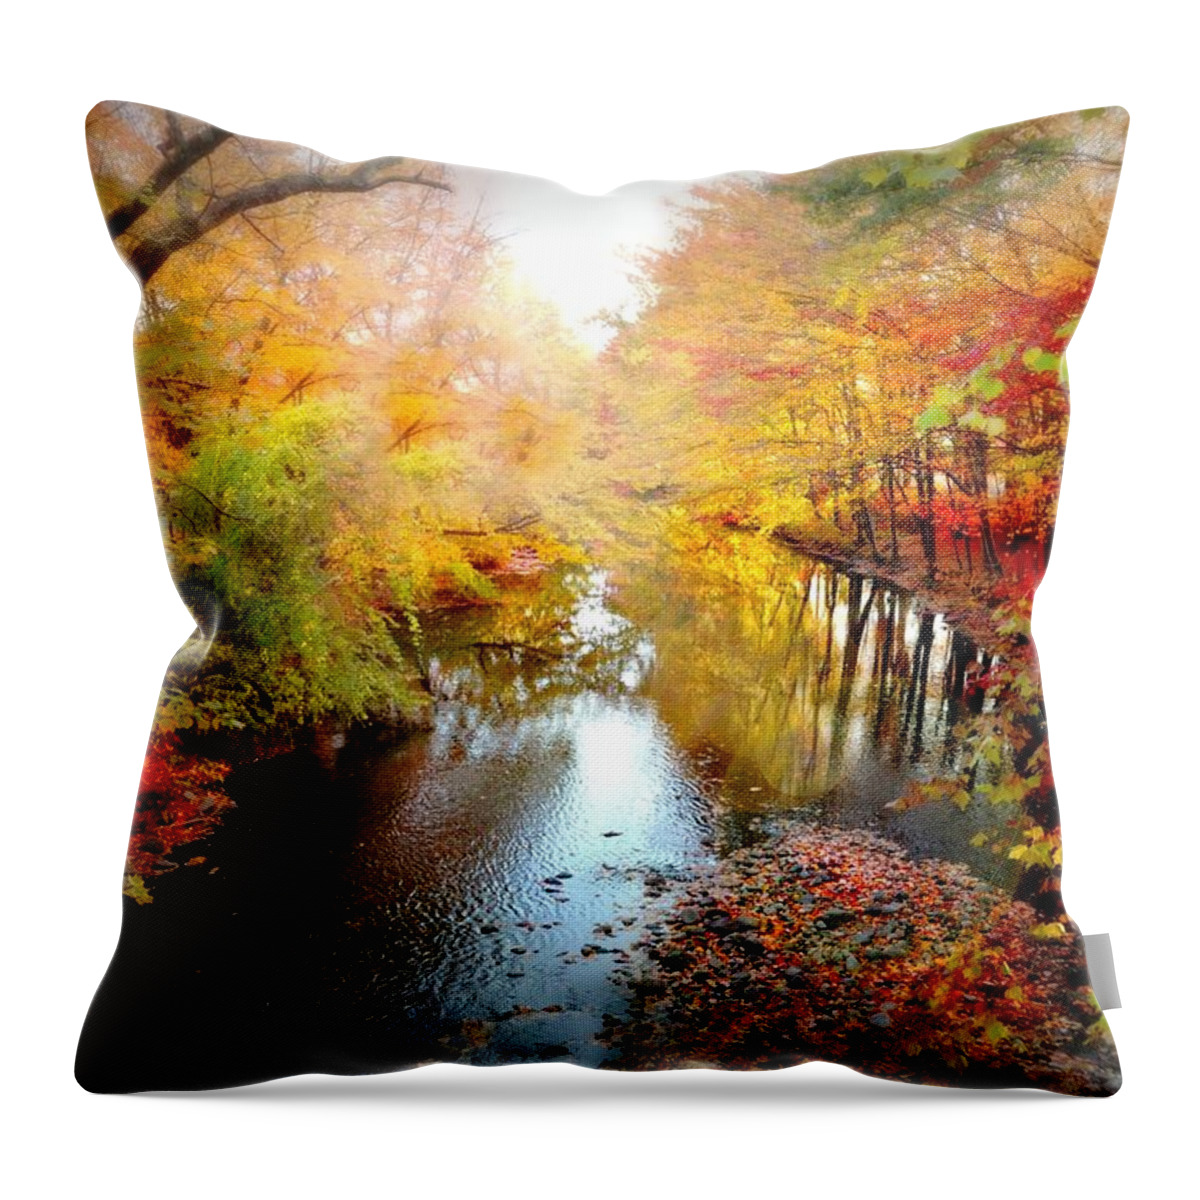 Landscape Throw Pillow featuring the photograph Trip Through My Mind by Diana Angstadt